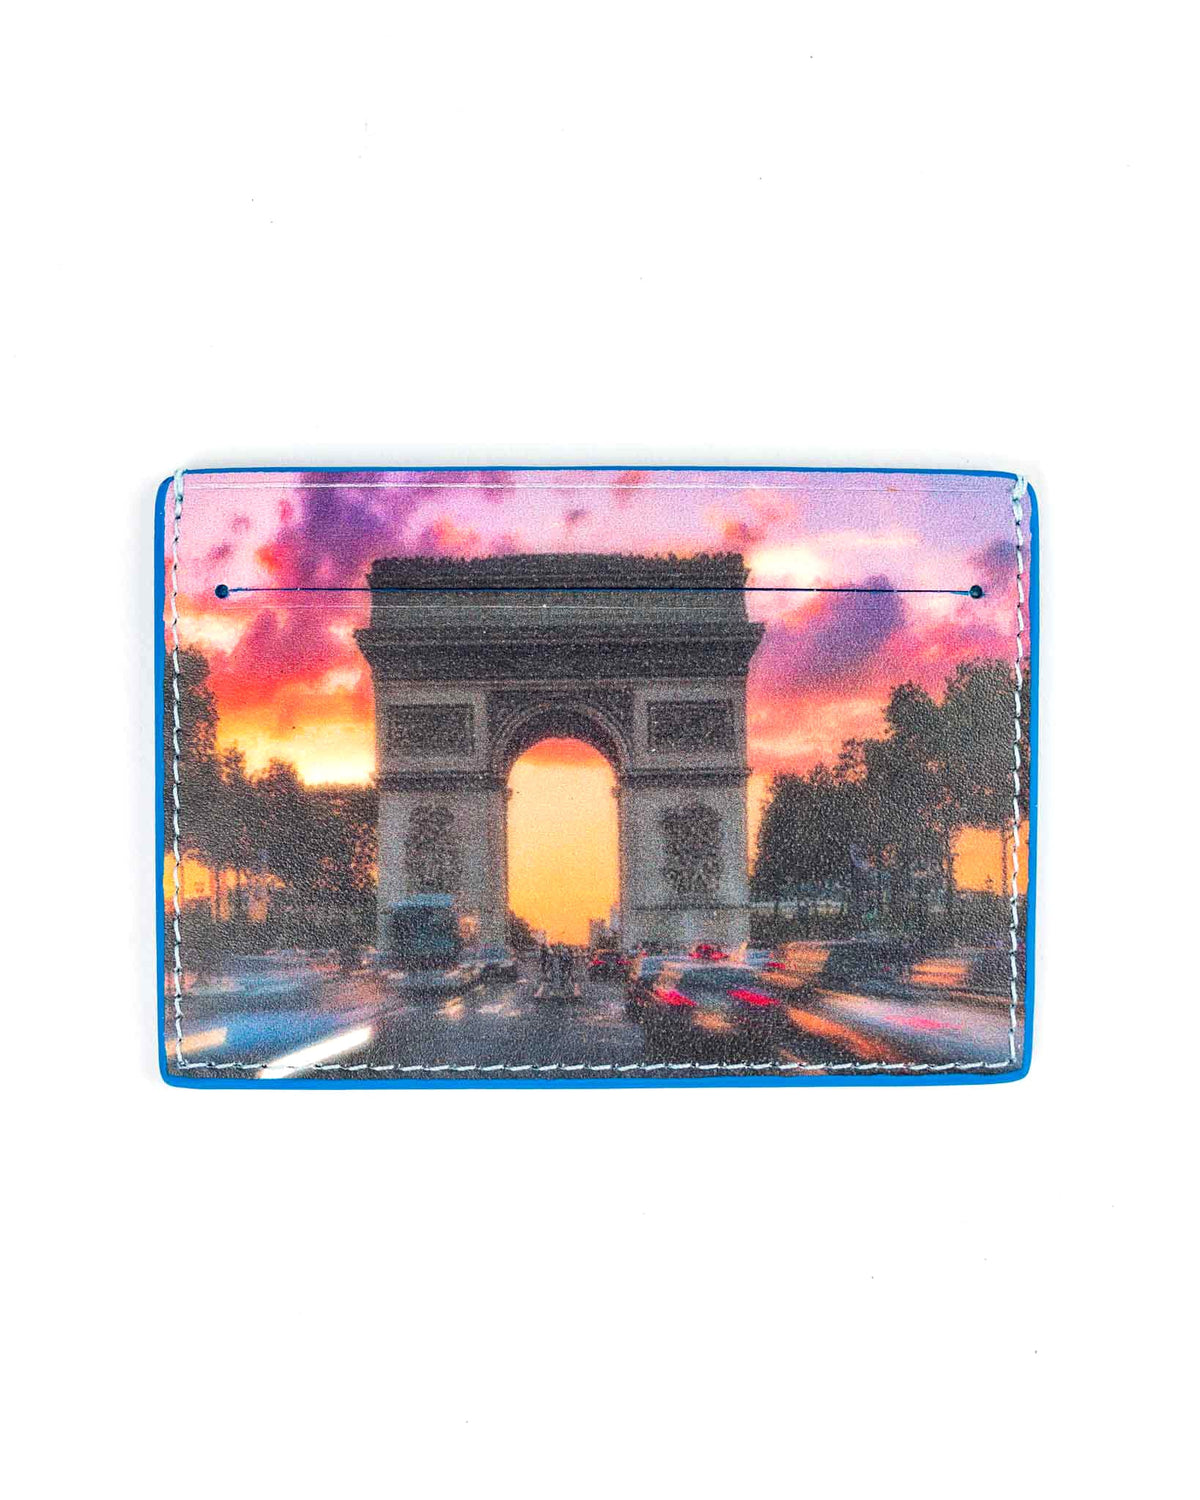 Champs-Elysees Card Case